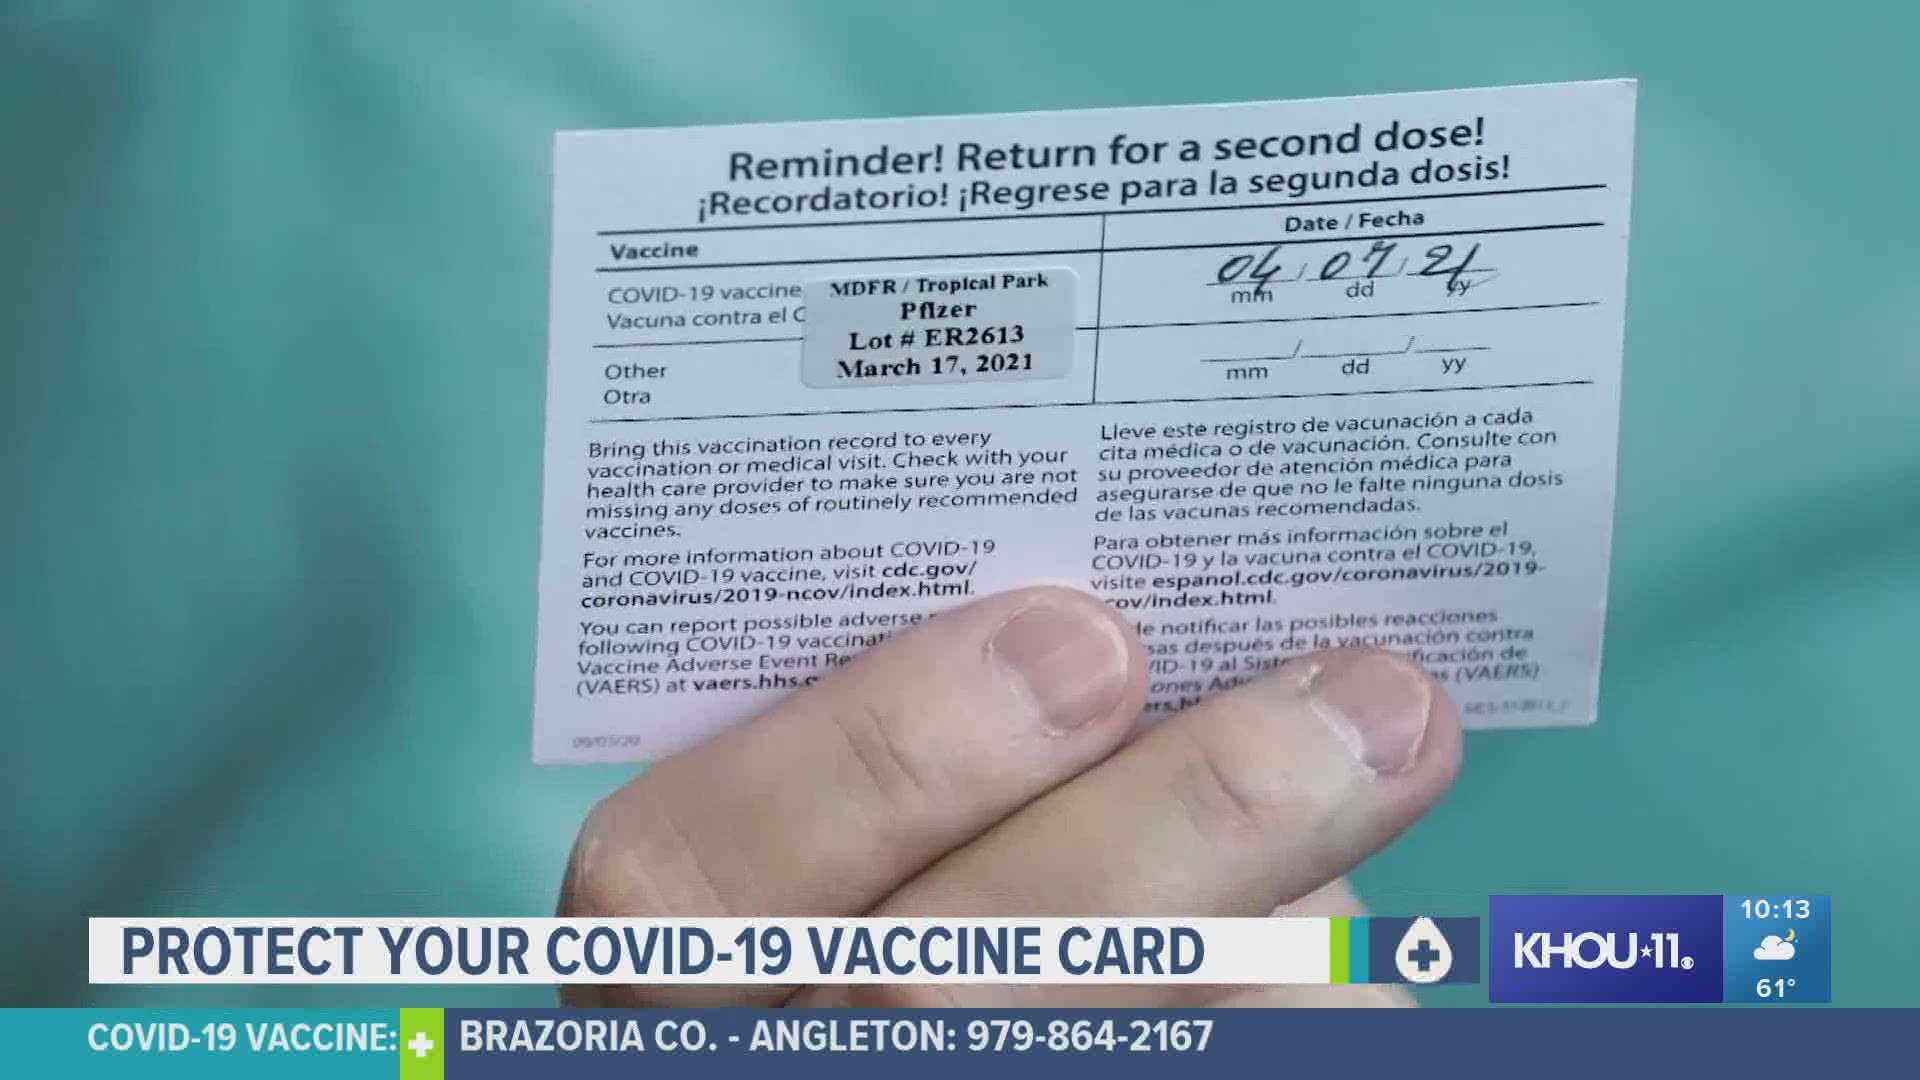 The CDC says you should keep your vaccine card and recommends taking a picture of it to be used as a back-up copy.